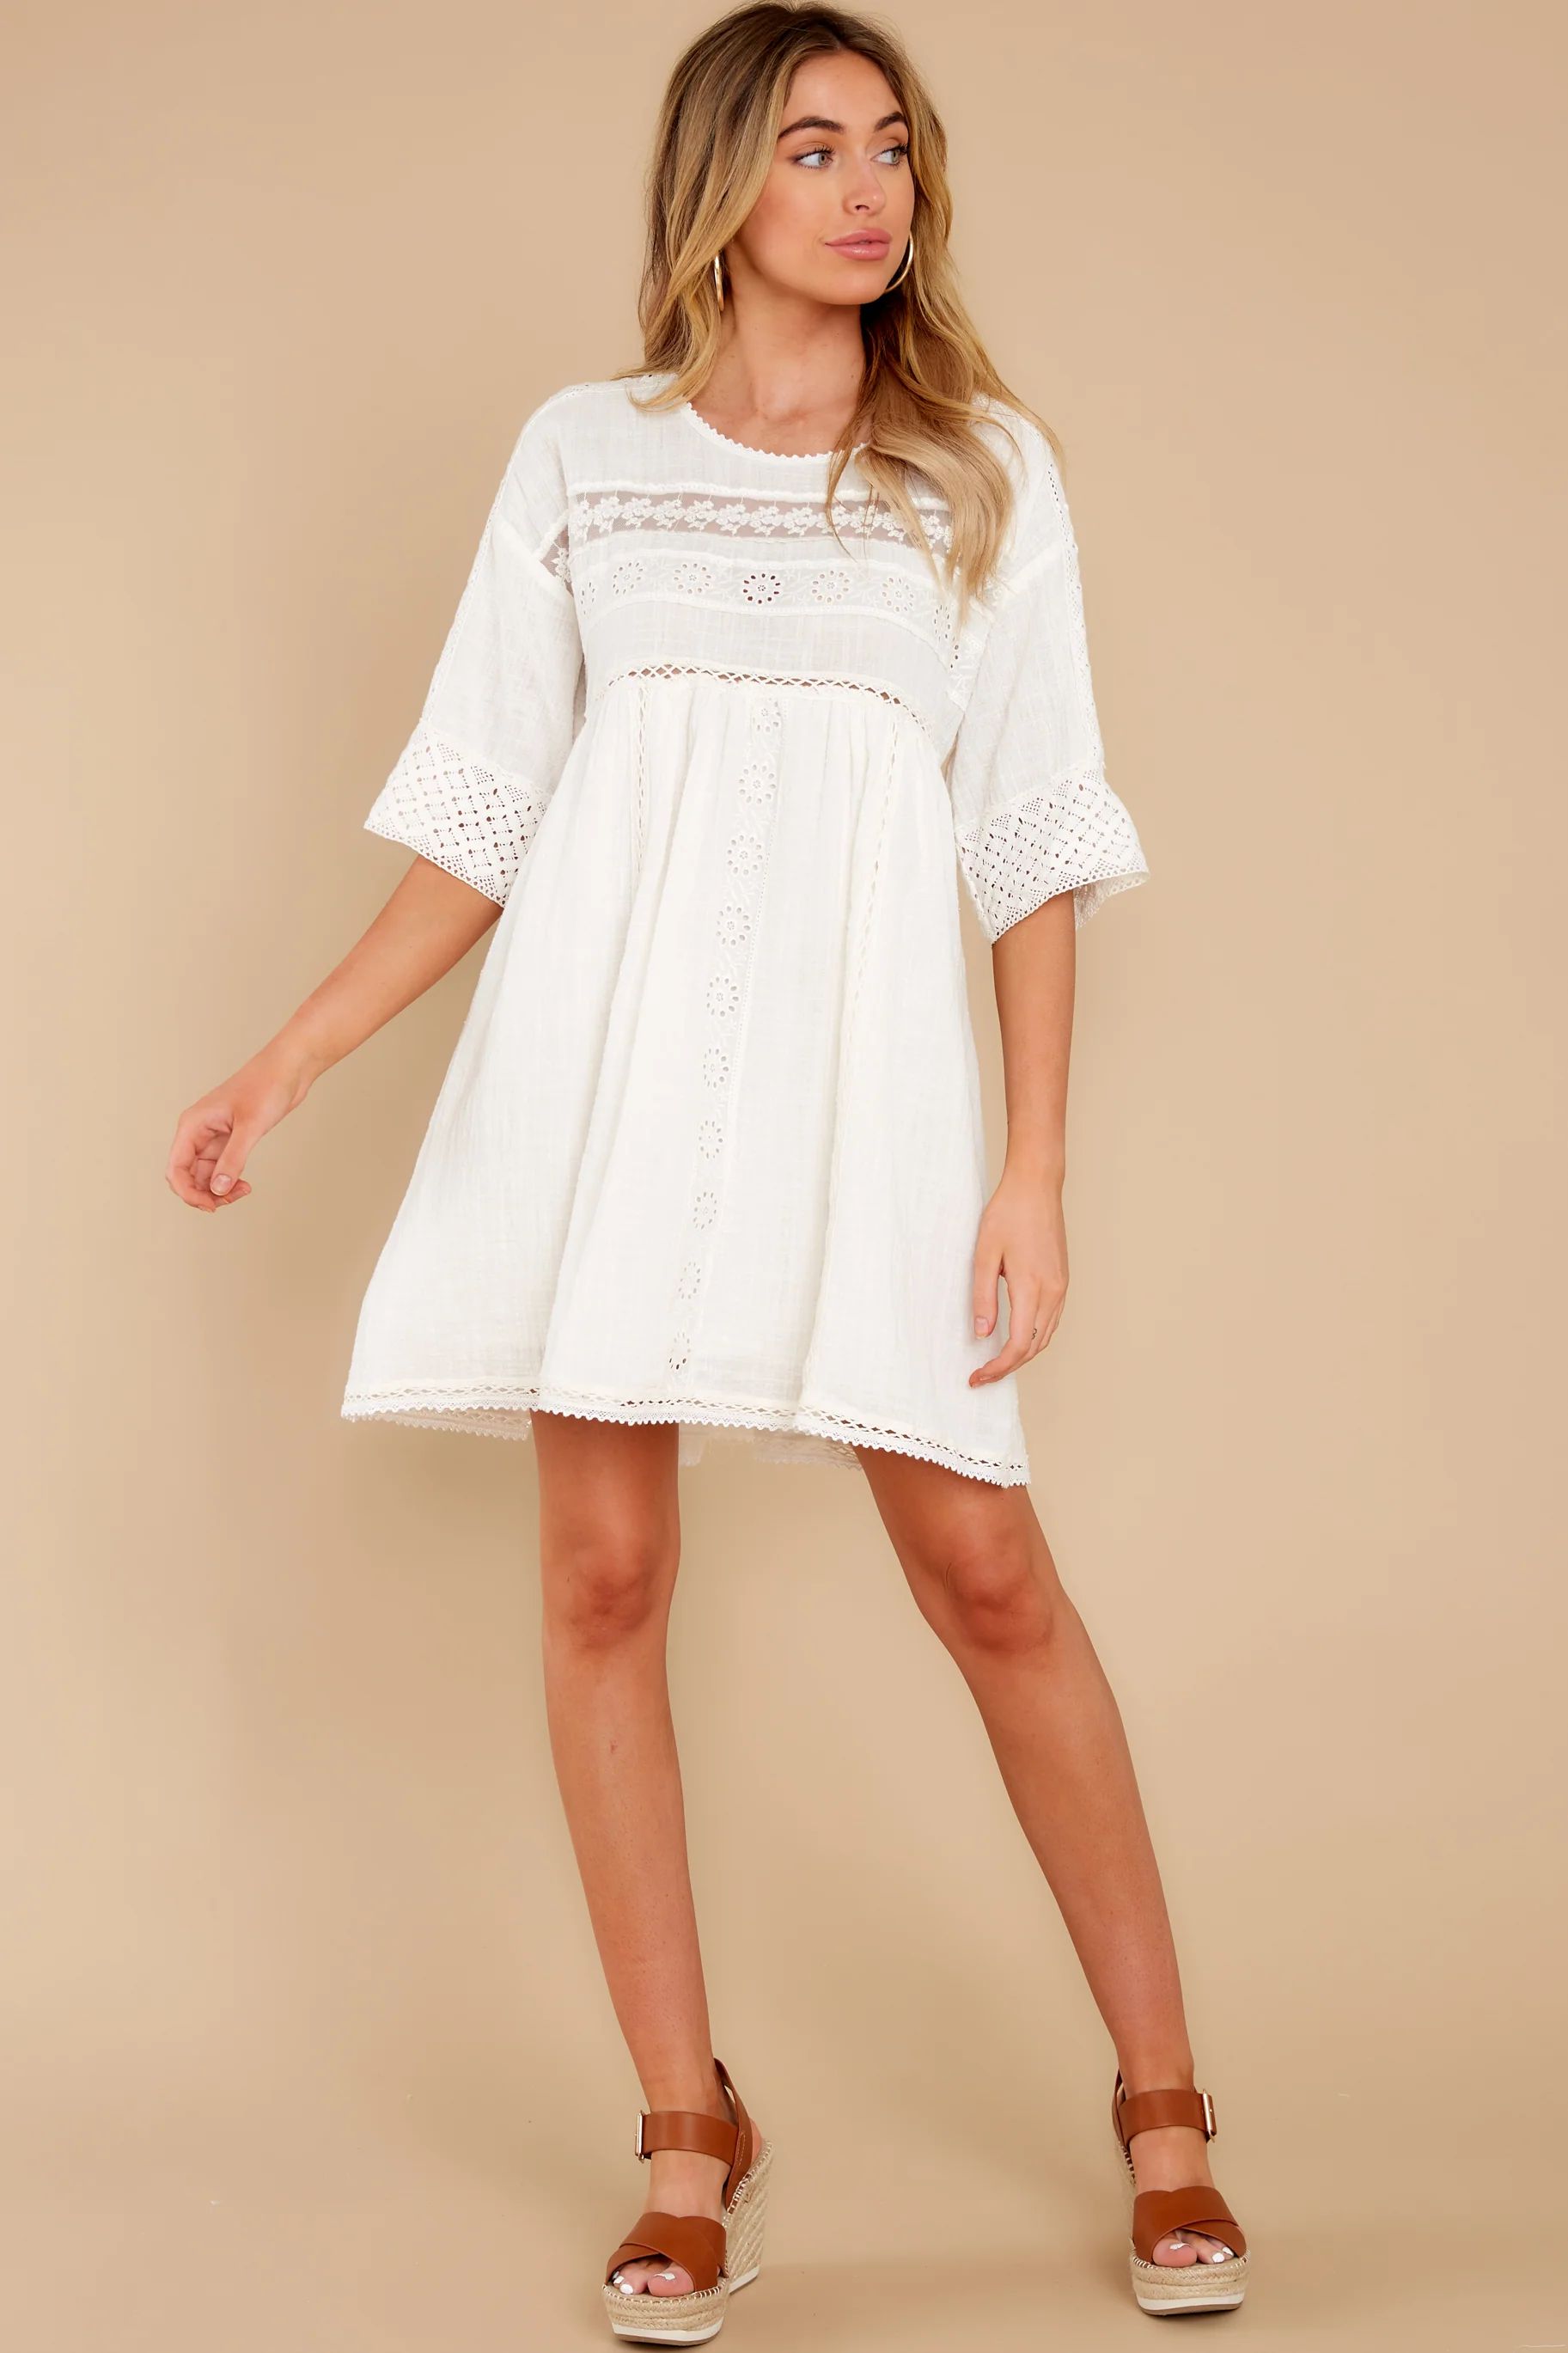 Touched By An Angel White Lace Dress | Red Dress 